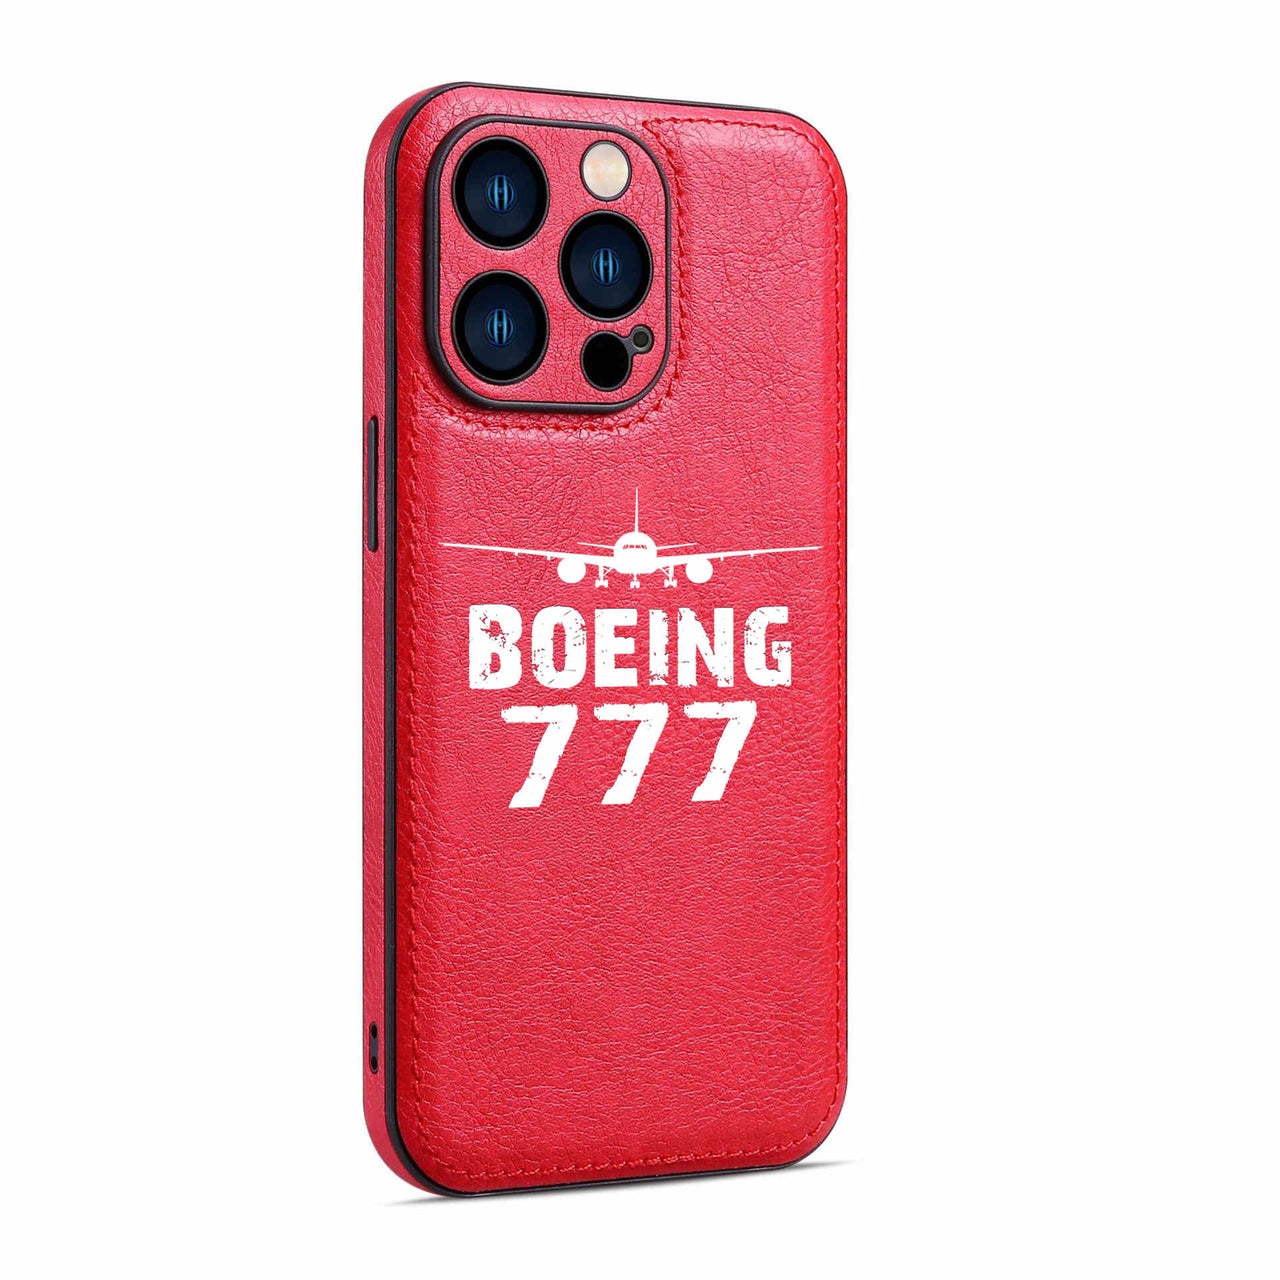 Boeing 777 & Plane Designed Leather iPhone Cases